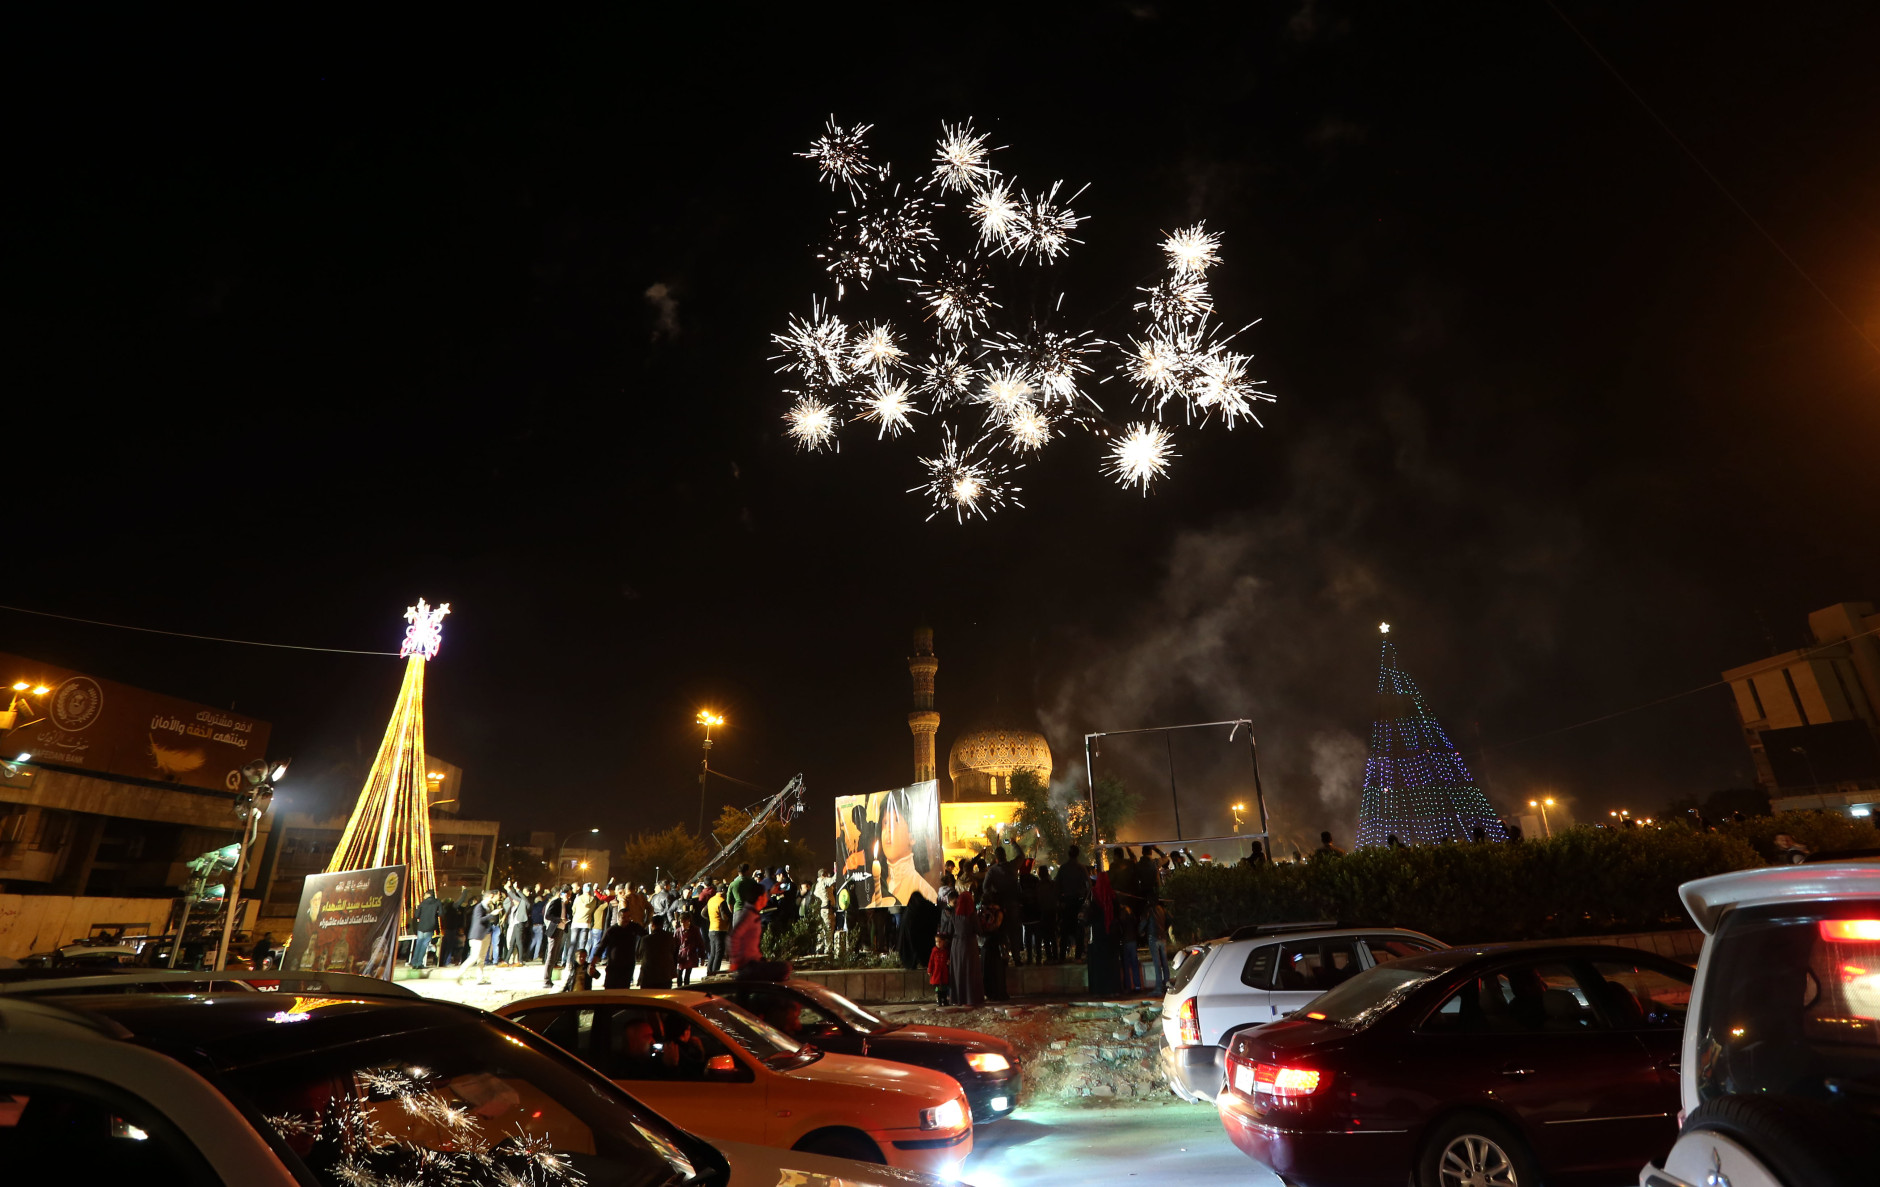 A Iraqi Crowds cheer as the countdown and fireworks begin during a New Year's Day celebration at Firdous Square in Baghdad, Iraq, Wednesday, Dec. 31, 2014. (AP Photo/Hadi Mizban)